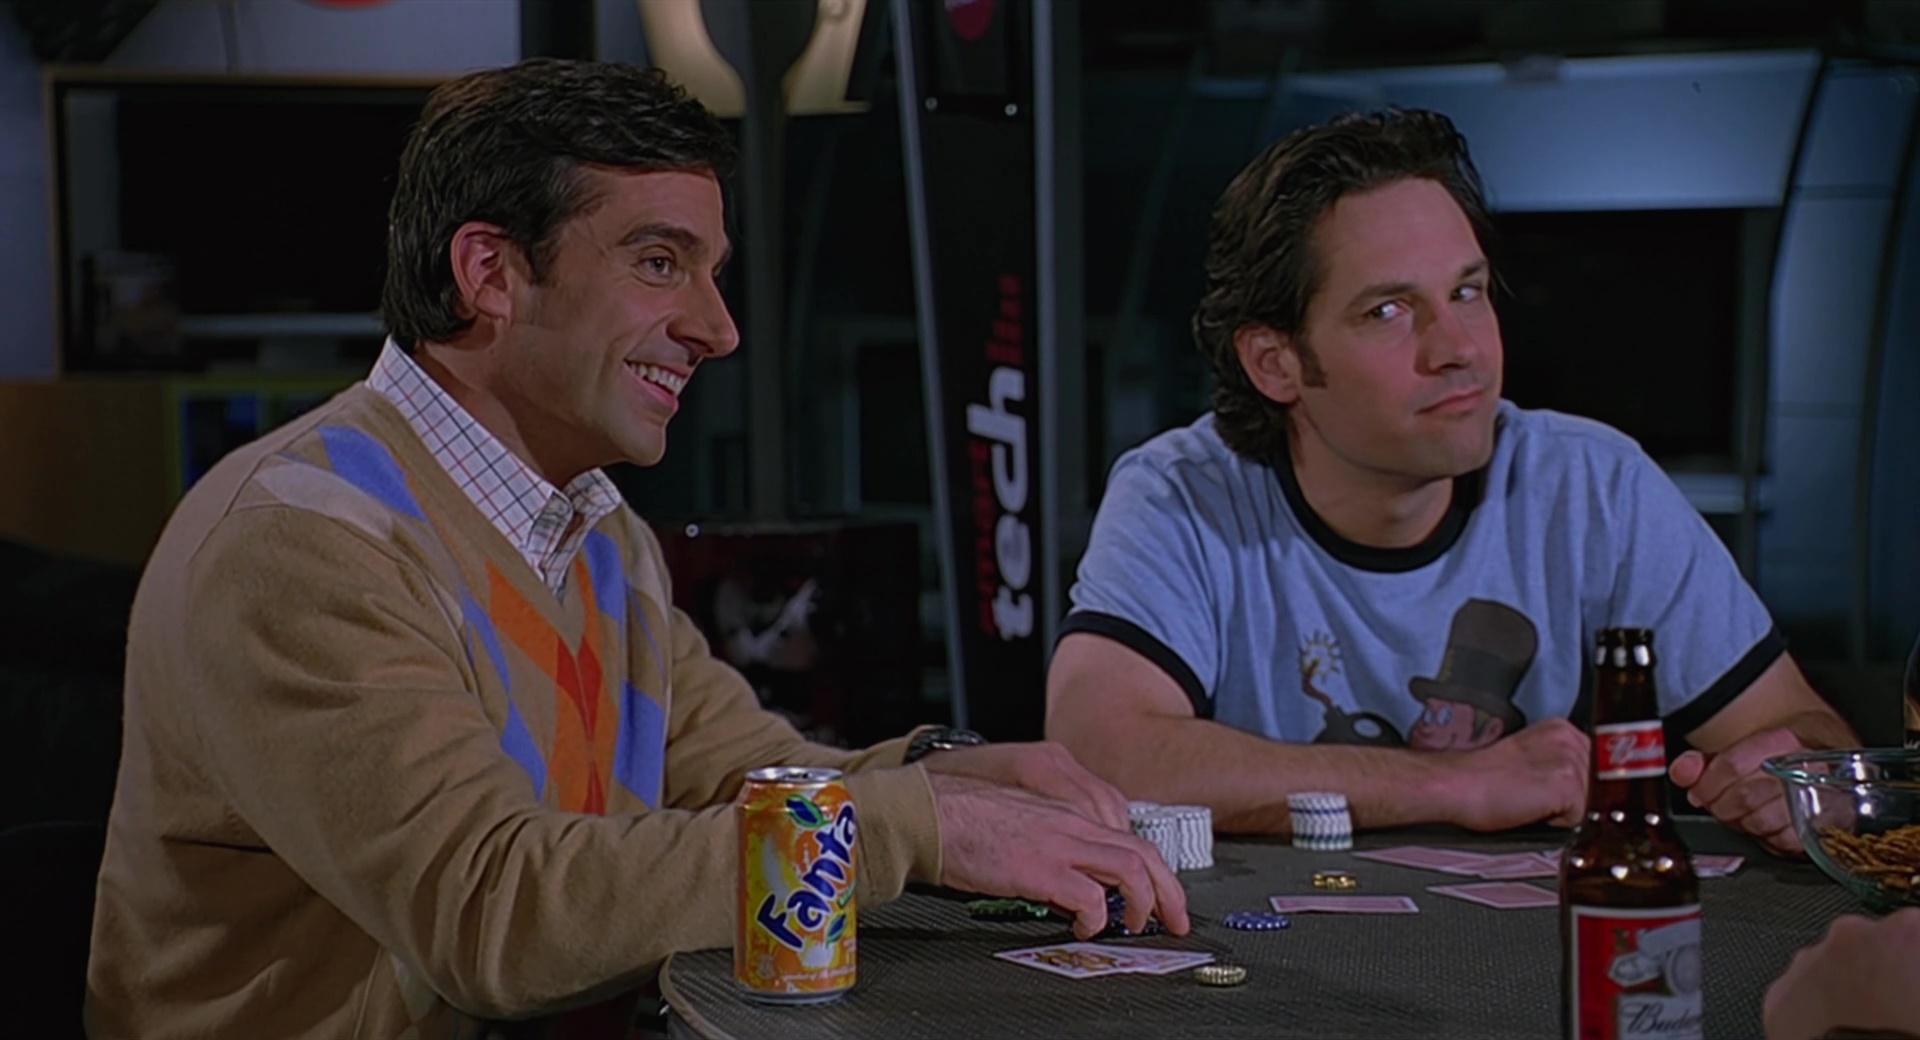 Fanta and Budweiser Beer in The 40-Year-Old Virgin (2005